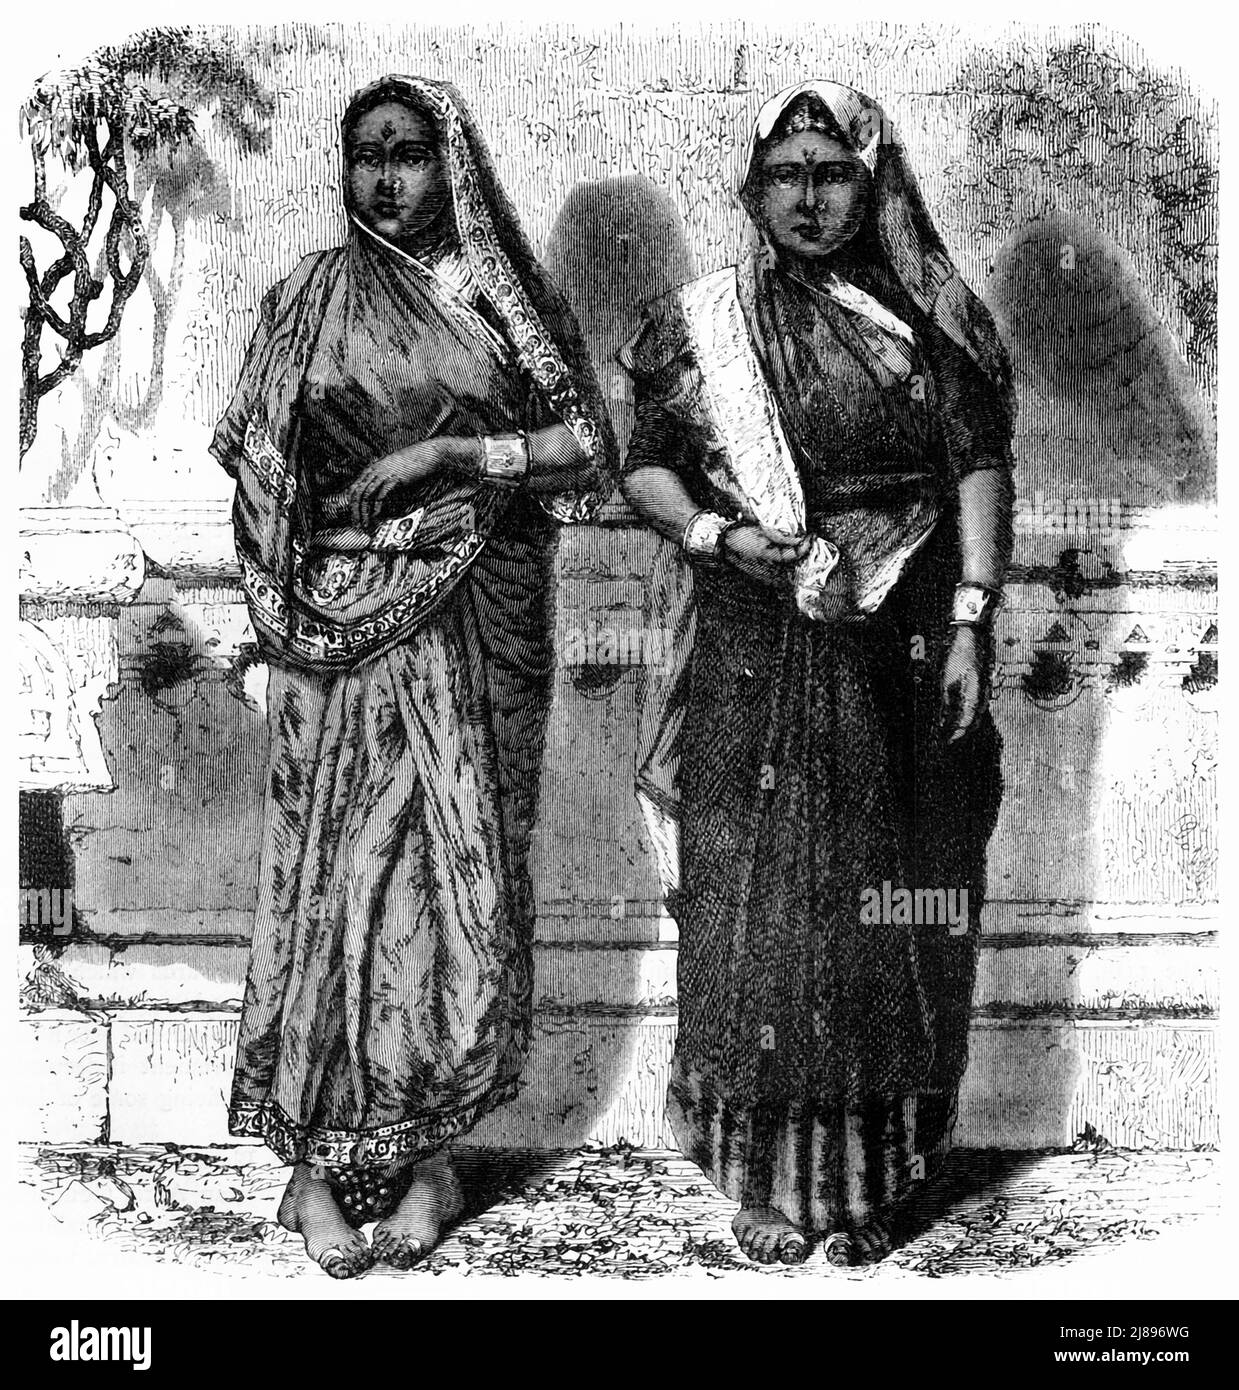 'Low Caste Hindoo Women of Bombay', c1891. From &quot;Cassell's Illustrated History of India Vol. I.&quot;, by James Grant. [Cassell Petter &amp; Galpin, London, Paris and New York] Stock Photo